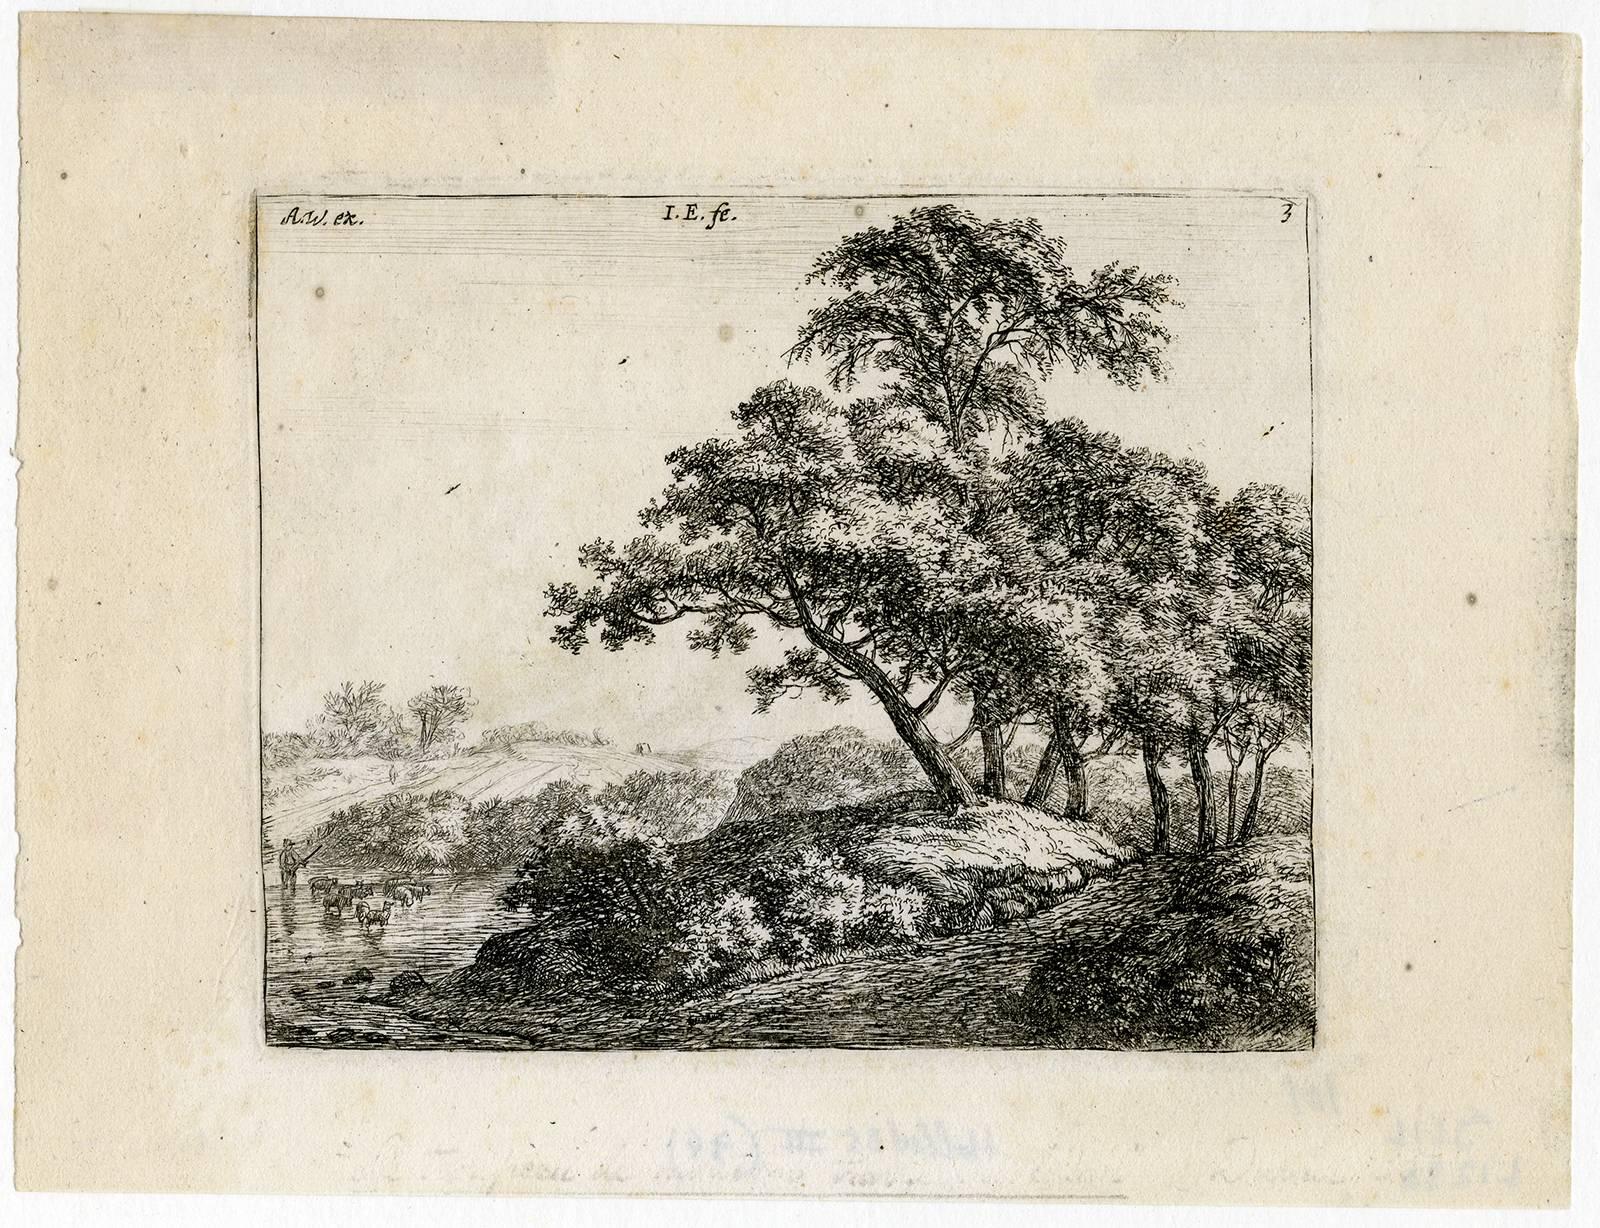 Anthonie Waterloo Landscape Print - Untitled - Landscape with a group of tree near a lake.